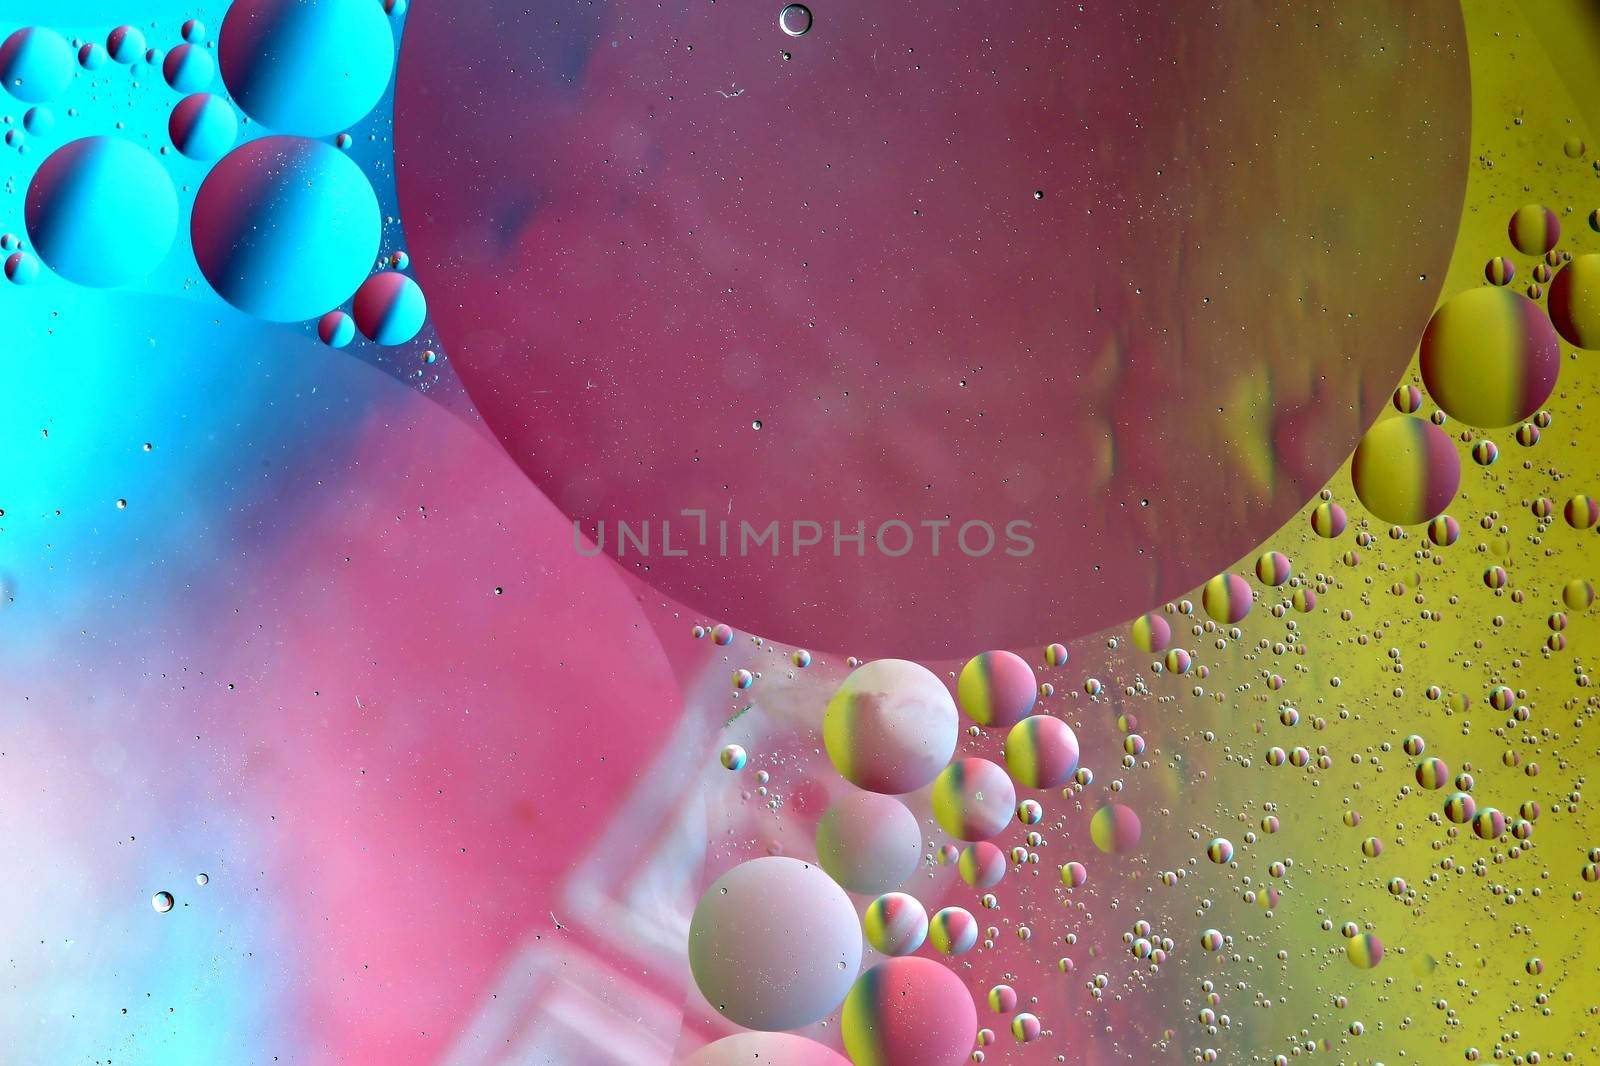 Abstract pattern of colored oil bubles on water